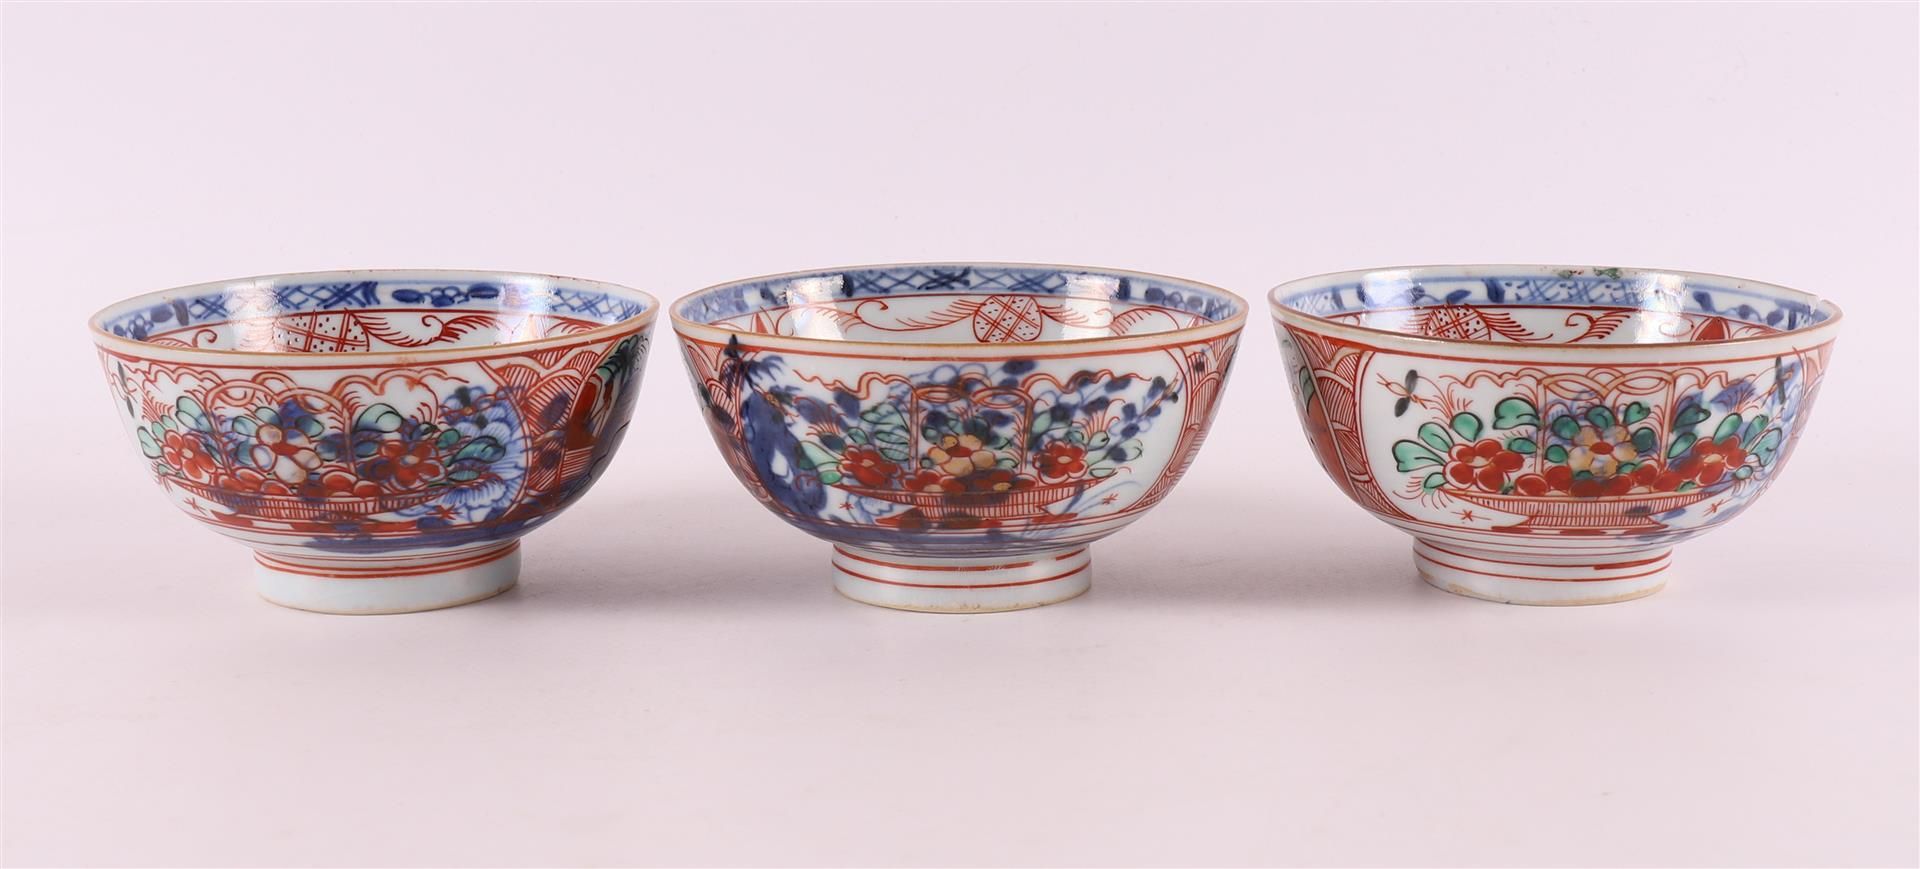 Five various porcelain Amsterdam variegated bowls, China, 18th century. - Image 13 of 17